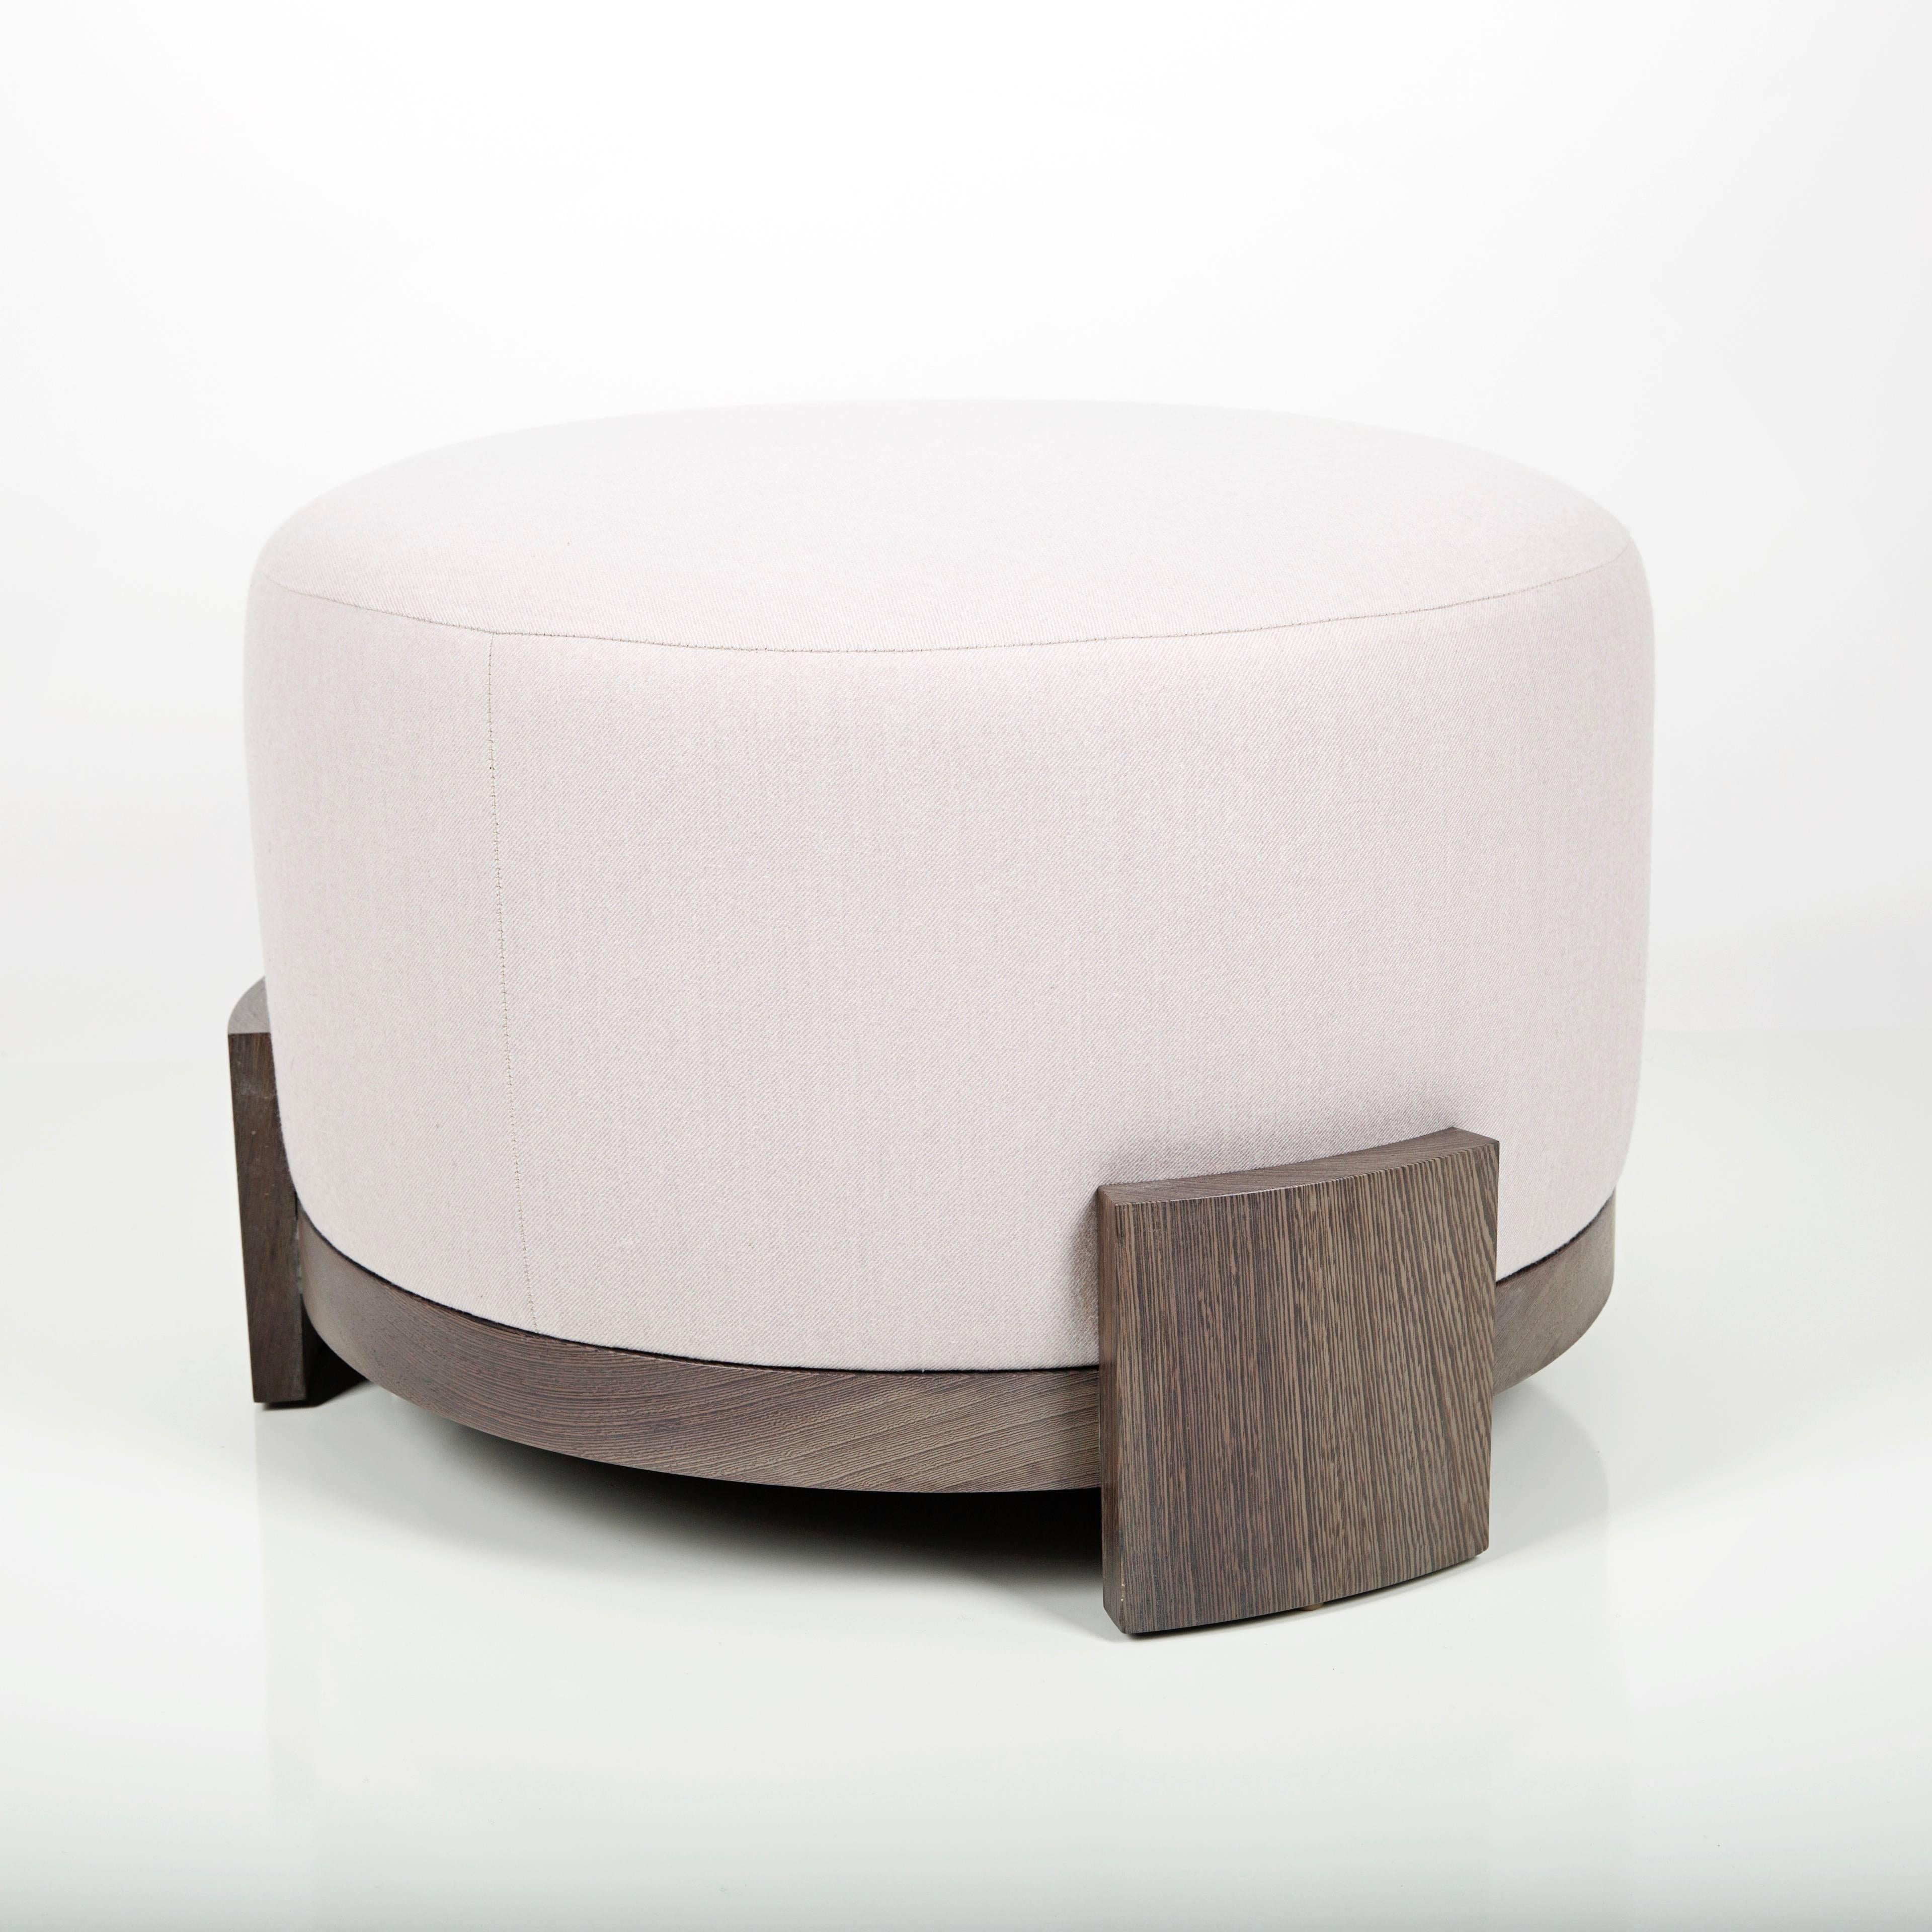 Our adorable coco ottoman is perfect for relaxing with your feet up…or pop them under our Calista console for additional seating. A modern take on a basic round ottoman. Chic, comfortable and stylish, perfect for any room. Pictured here handcrafted